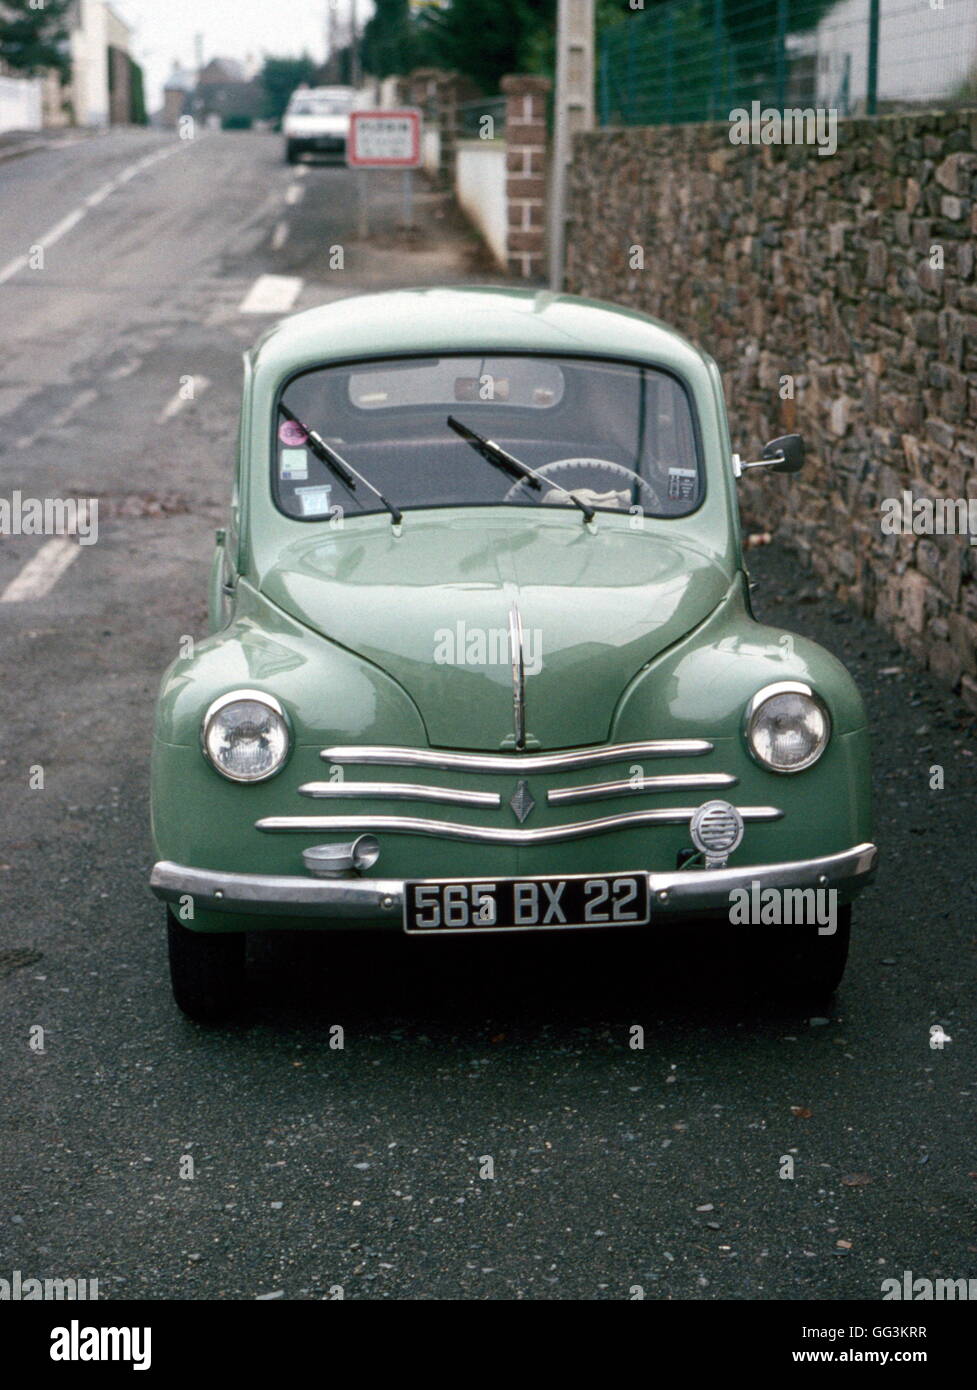 AJAXNETPHOTO. ST.BRIEUC, FRANCE. - SMALL FRECH SALOON CAR - RENAULT 4CV MANUFACTURED FROM AUGUST 1947 TO JULY 1961. ALSO KNOWN AS HINO 4CV, RENAULT 4/4, RENAULT 760 AND 750 AND RENAULT QUINTETTE. SEEN HERE IN BRITANNY.  PHOTO:JONATHAN EASTLAND/AJAX  REF:970X00 Stock Photo